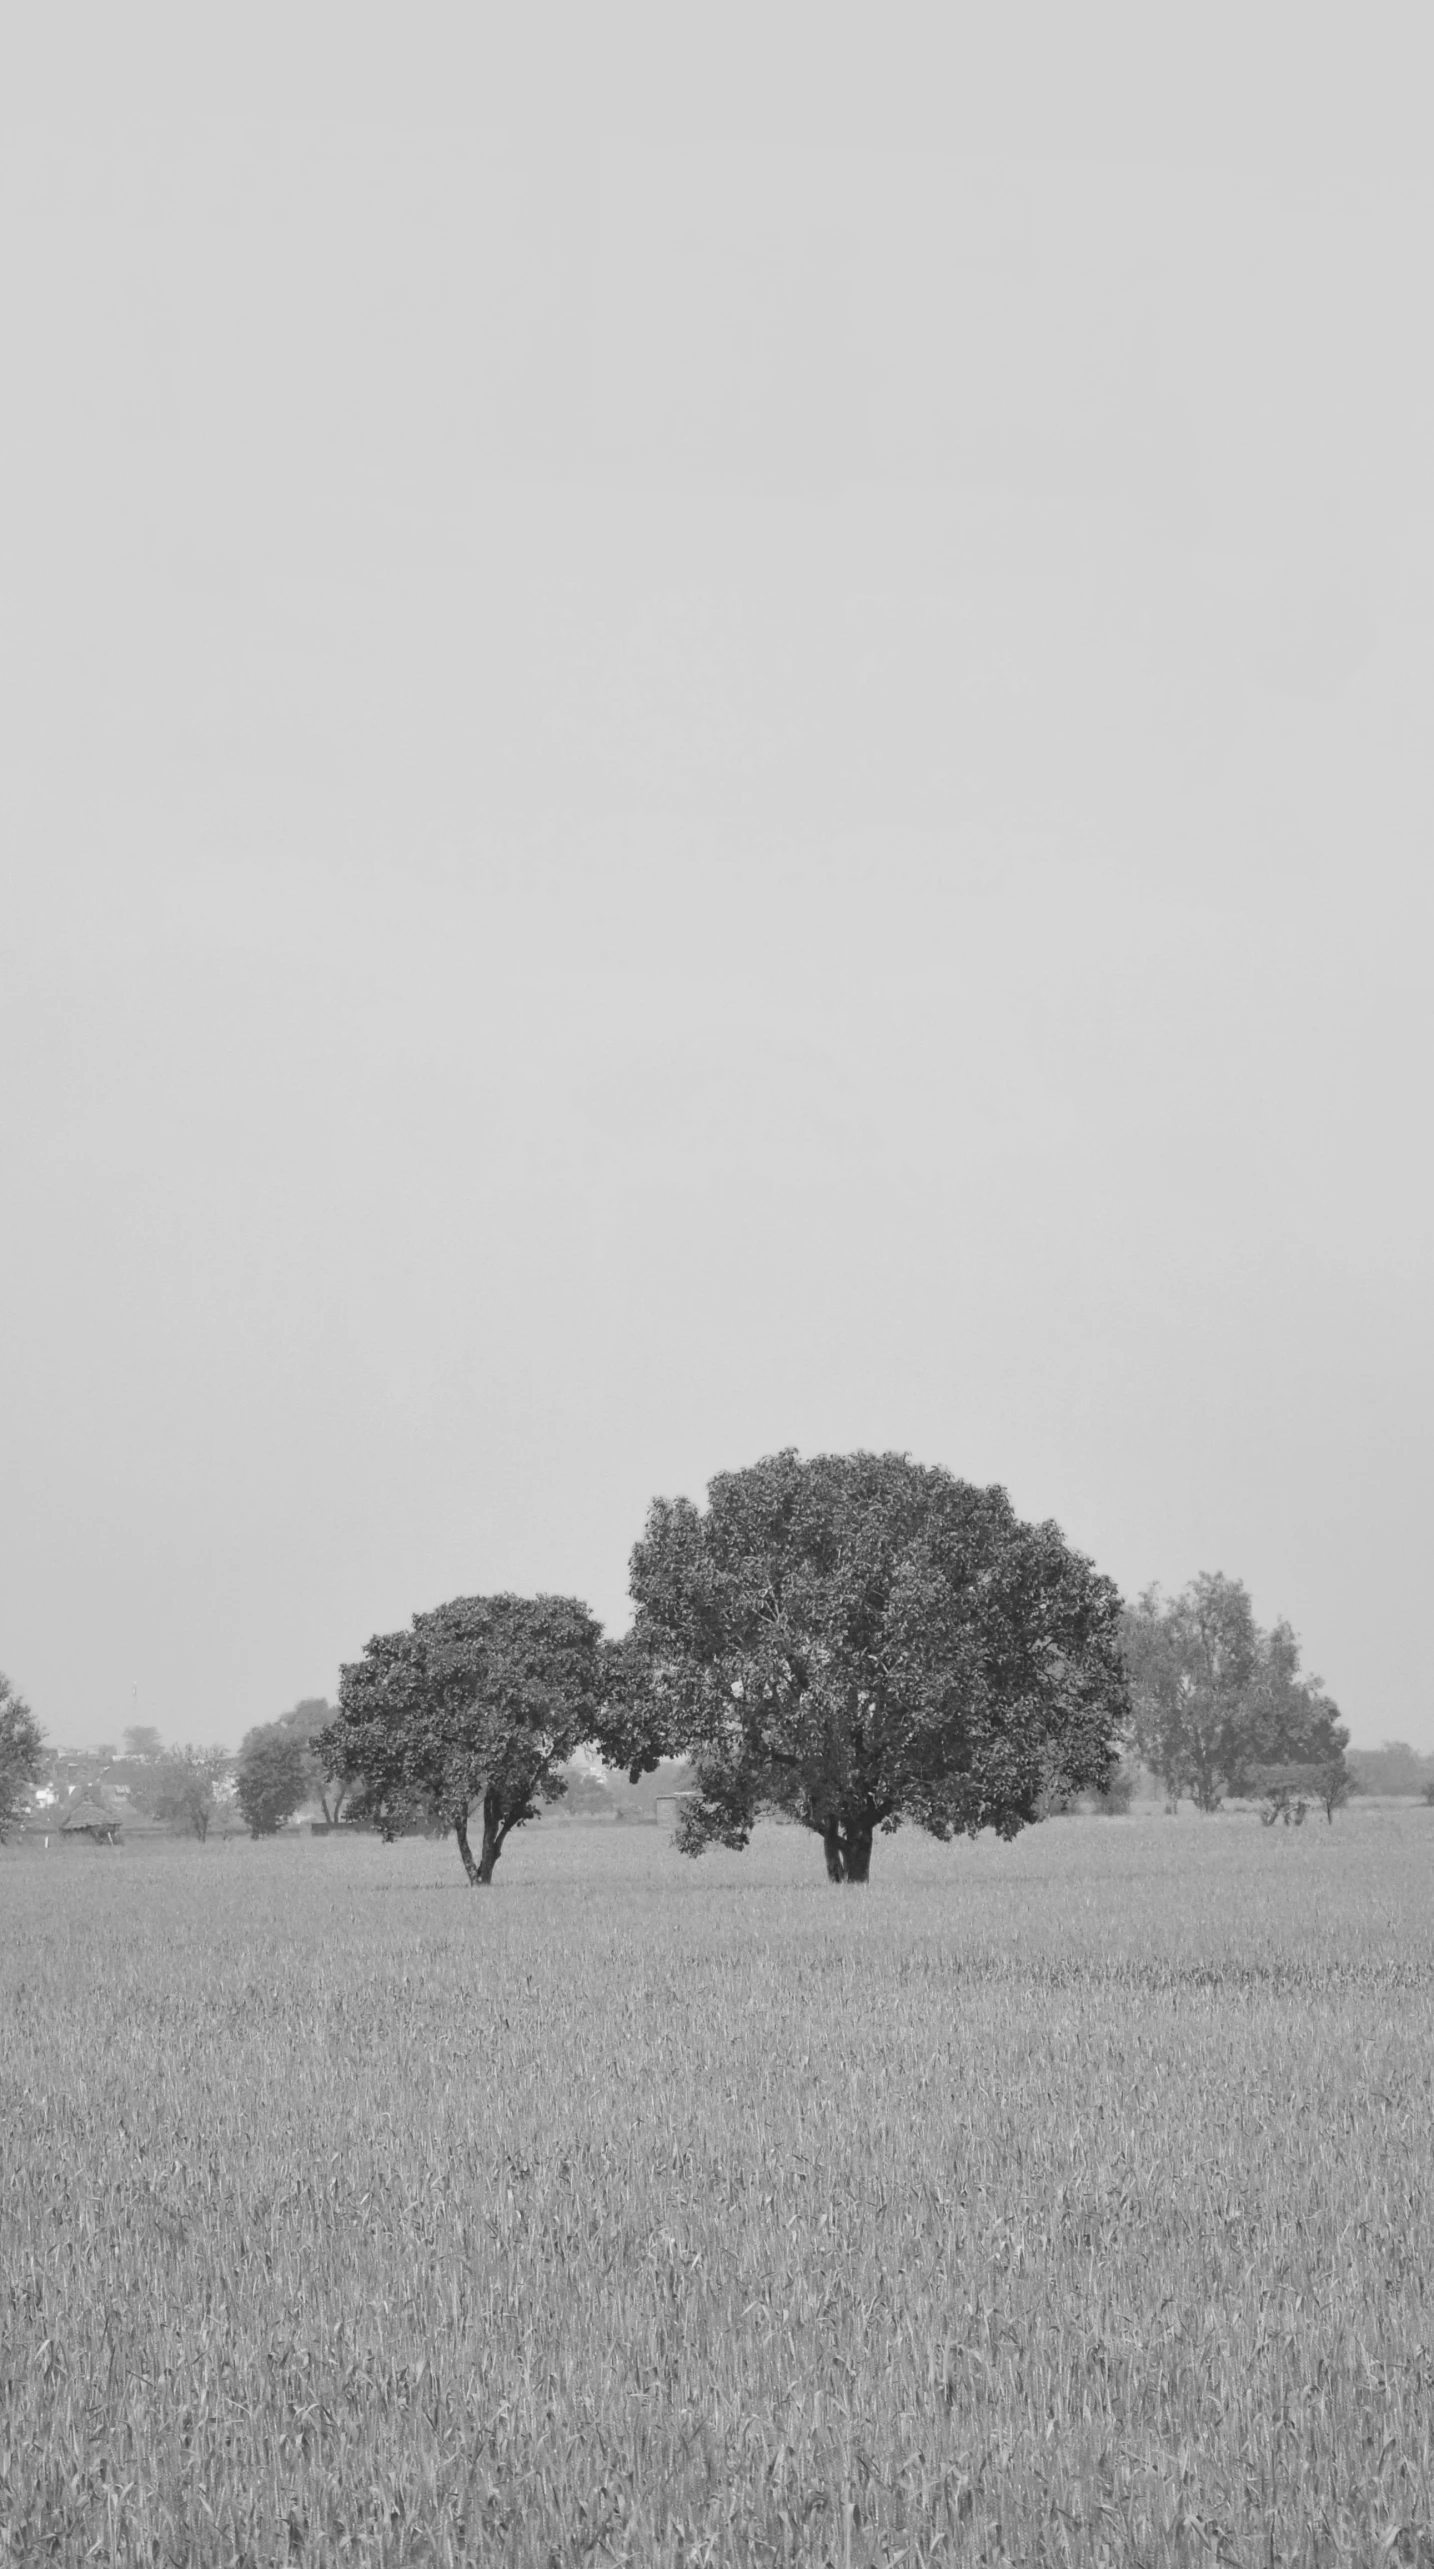 two large trees standing in the middle of a grassy field